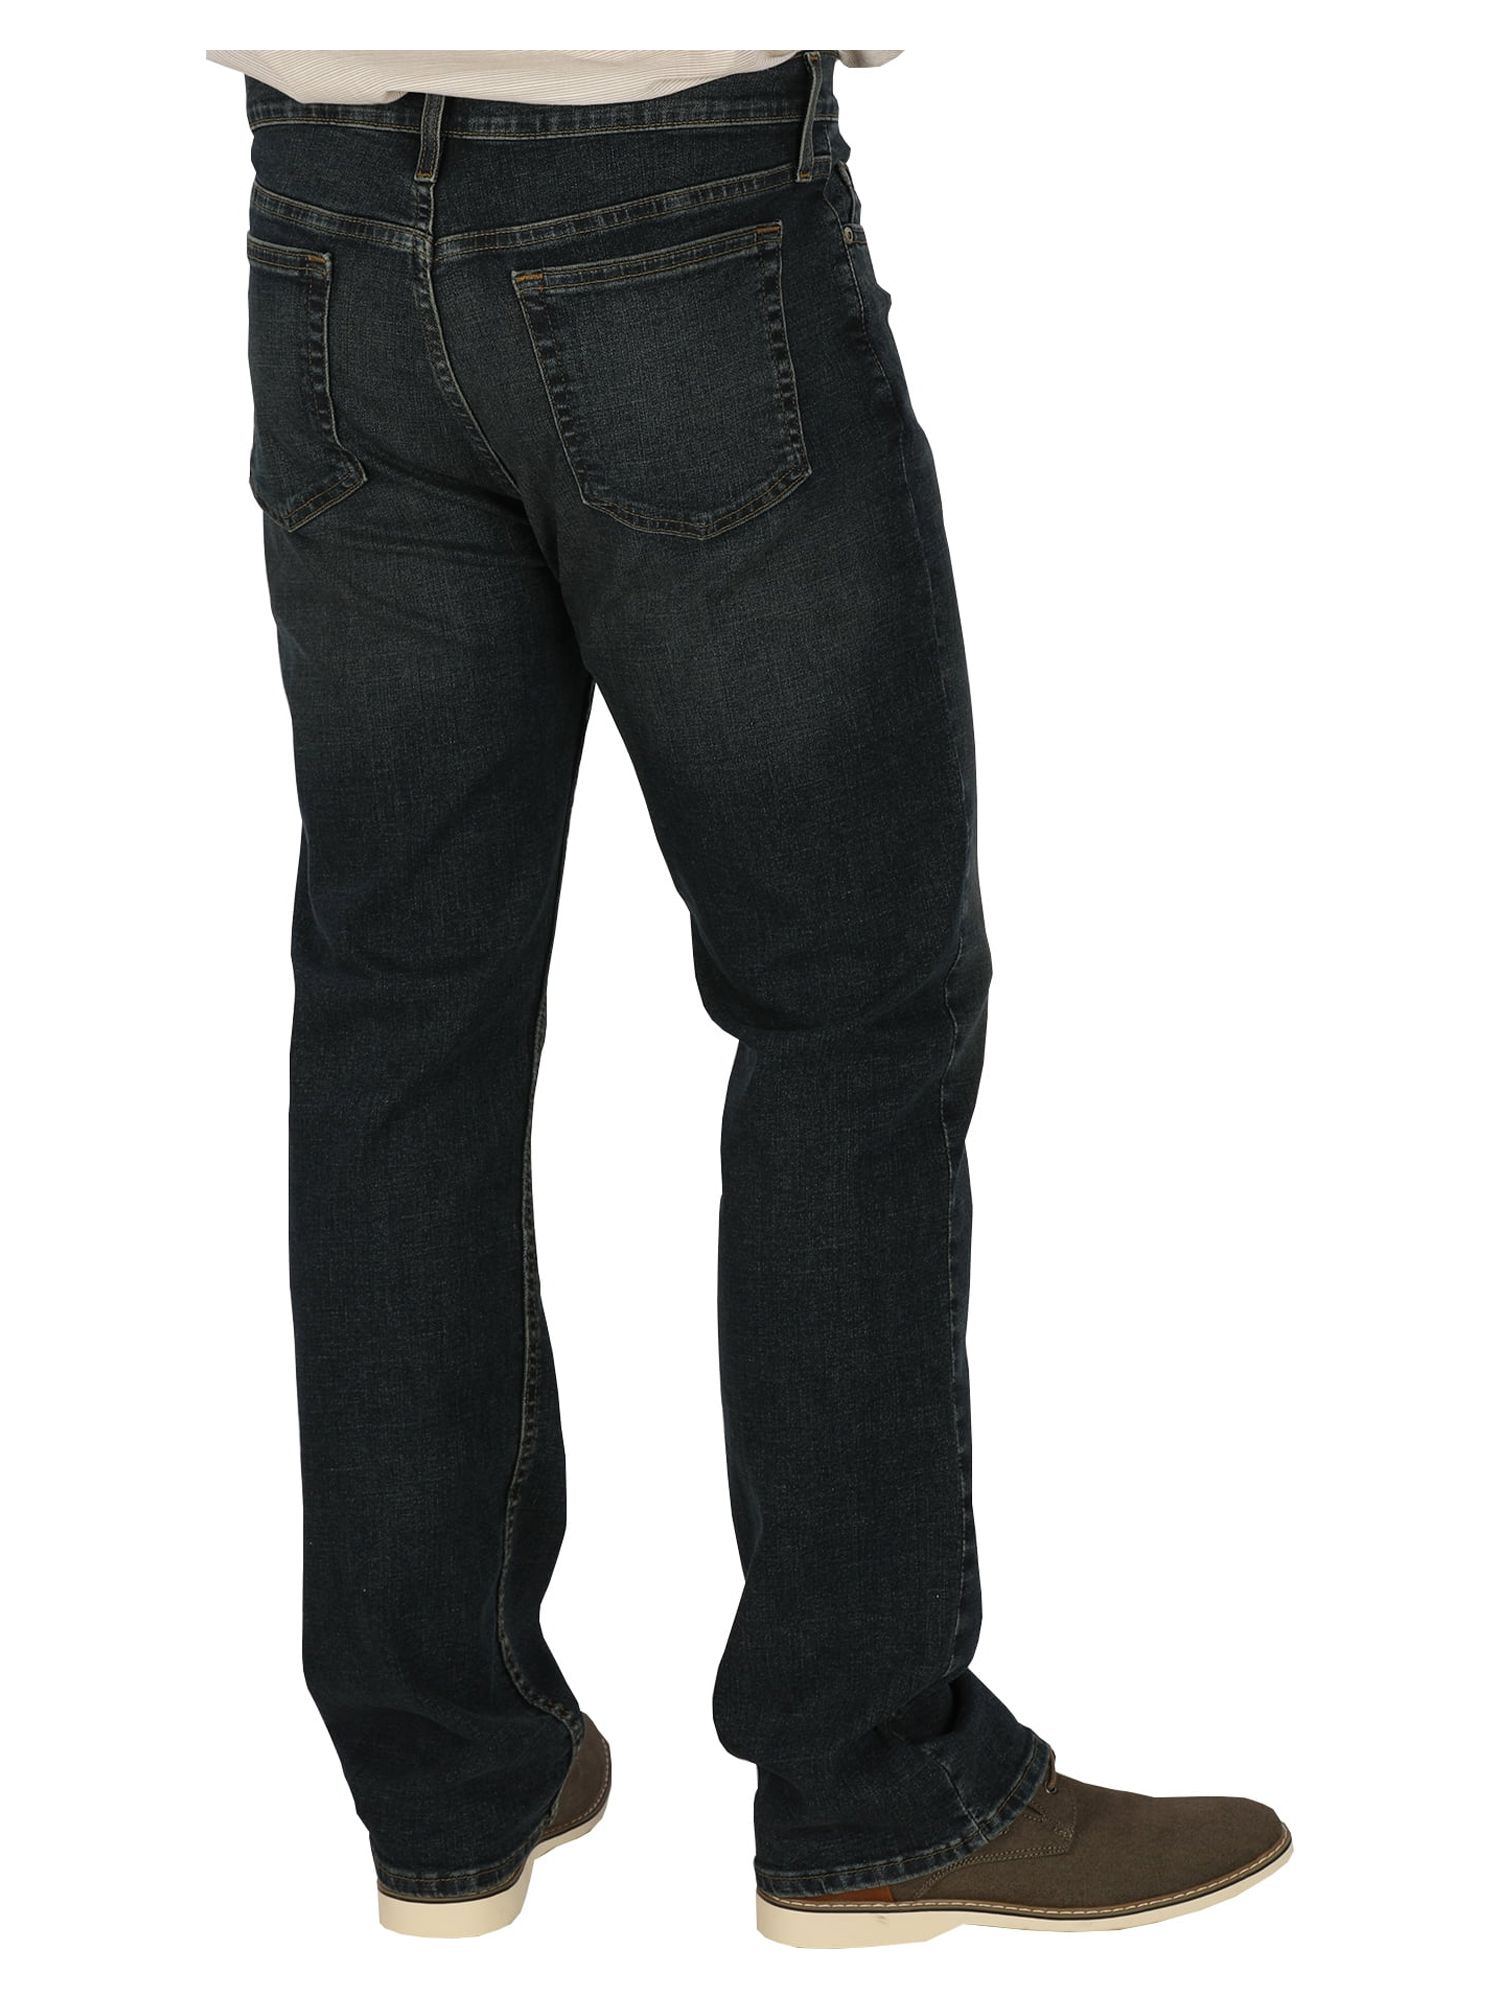 George Men's Bootcut Jeans - image 2 of 6